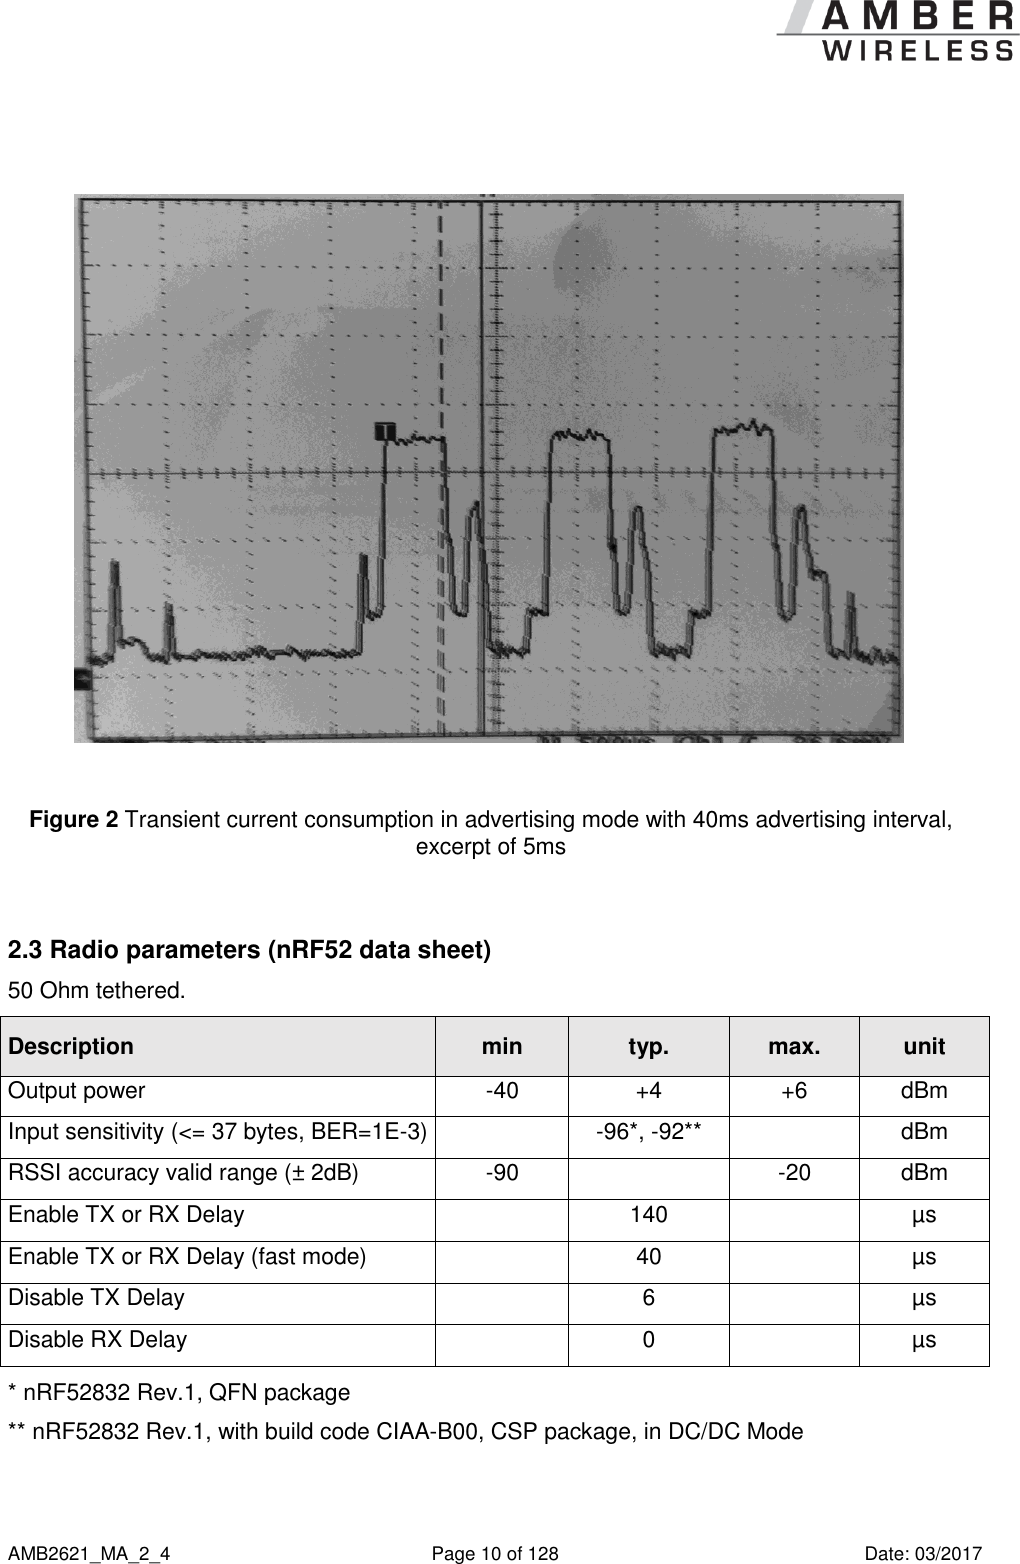      AMB2621_MA_2_4  Page 10 of 128  Date: 03/2017   Figure 2 Transient current consumption in advertising mode with 40ms advertising interval, excerpt of 5ms  2.3 Radio parameters (nRF52 data sheet) 50 Ohm tethered. Description min typ. max. unit Output power -40 +4 +6 dBm Input sensitivity (&lt;= 37 bytes, BER=1E-3)  -96*, -92**  dBm RSSI accuracy valid range (± 2dB) -90  -20 dBm Enable TX or RX Delay  140  µs Enable TX or RX Delay (fast mode)  40  µs Disable TX Delay  6  µs Disable RX Delay  0  µs * nRF52832 Rev.1, QFN package ** nRF52832 Rev.1, with build code CIAA-B00, CSP package, in DC/DC Mode 